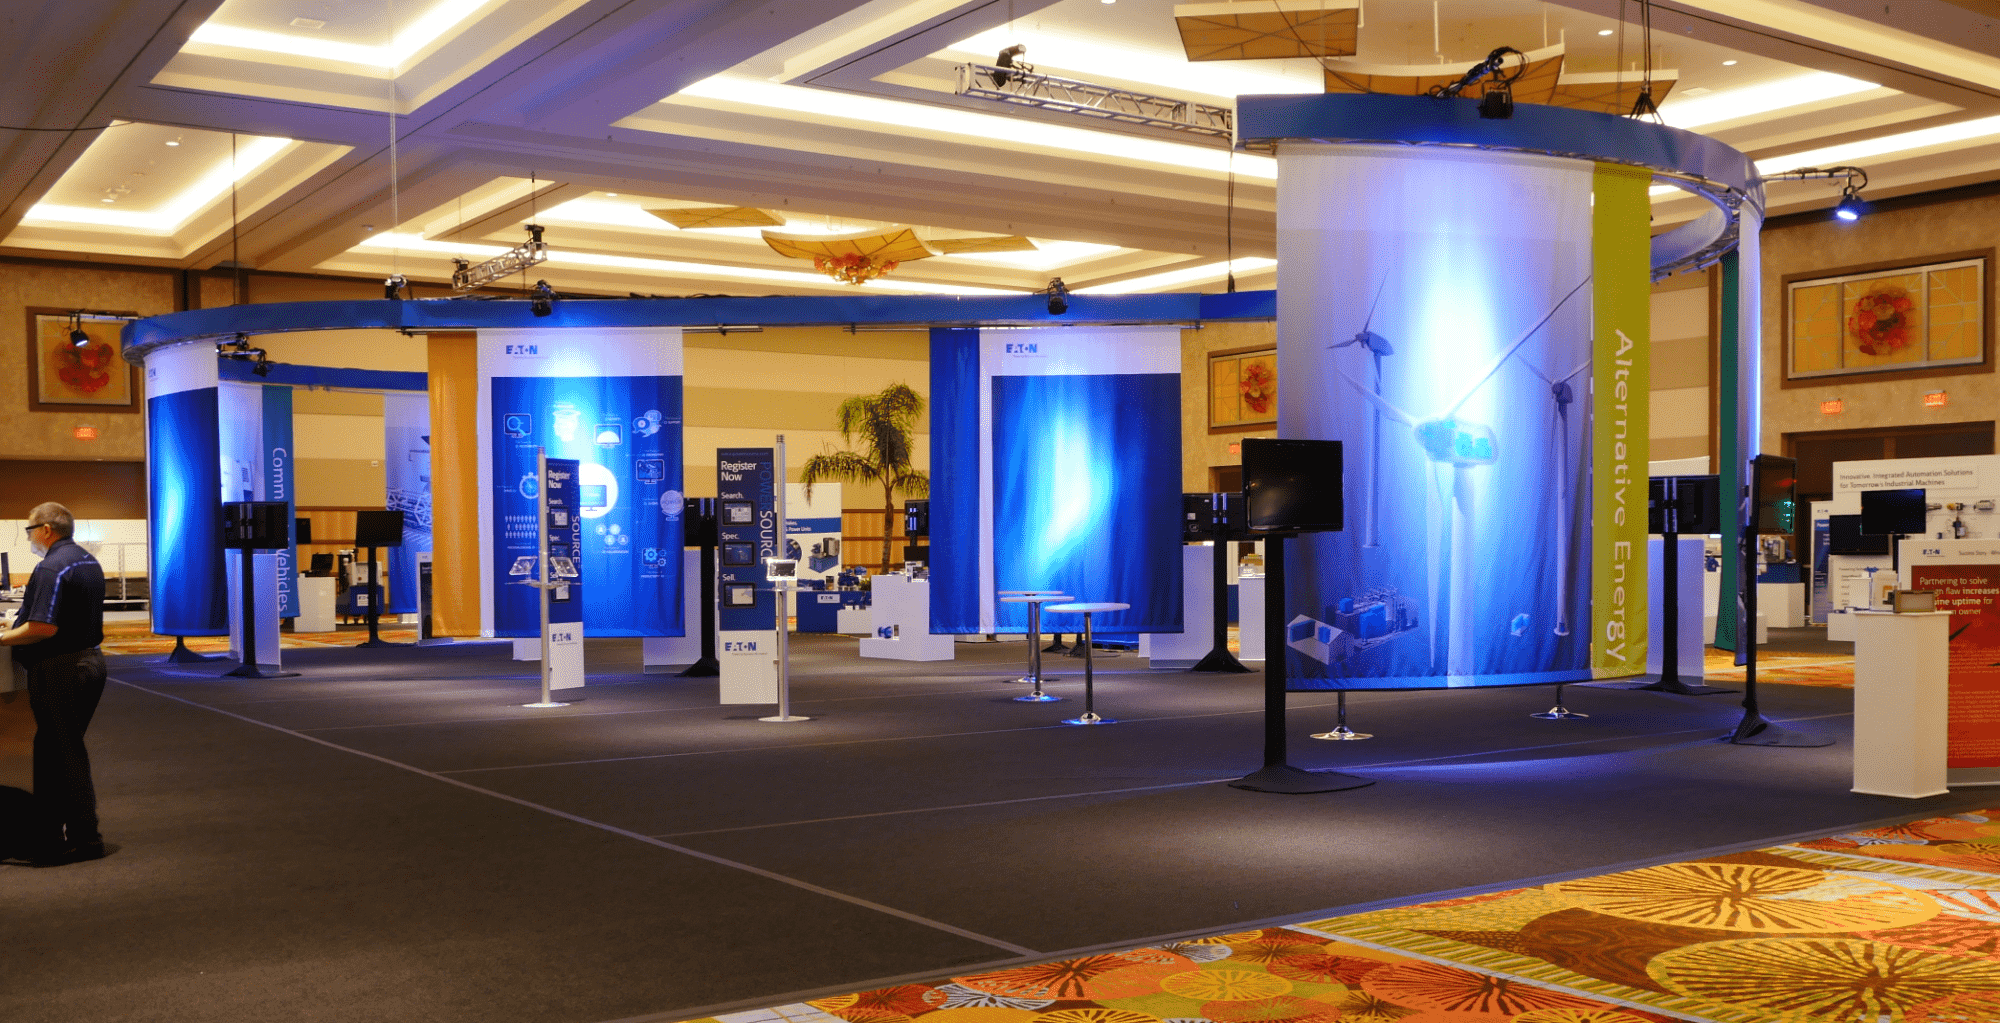 Company display their products inside of an exhibit hall